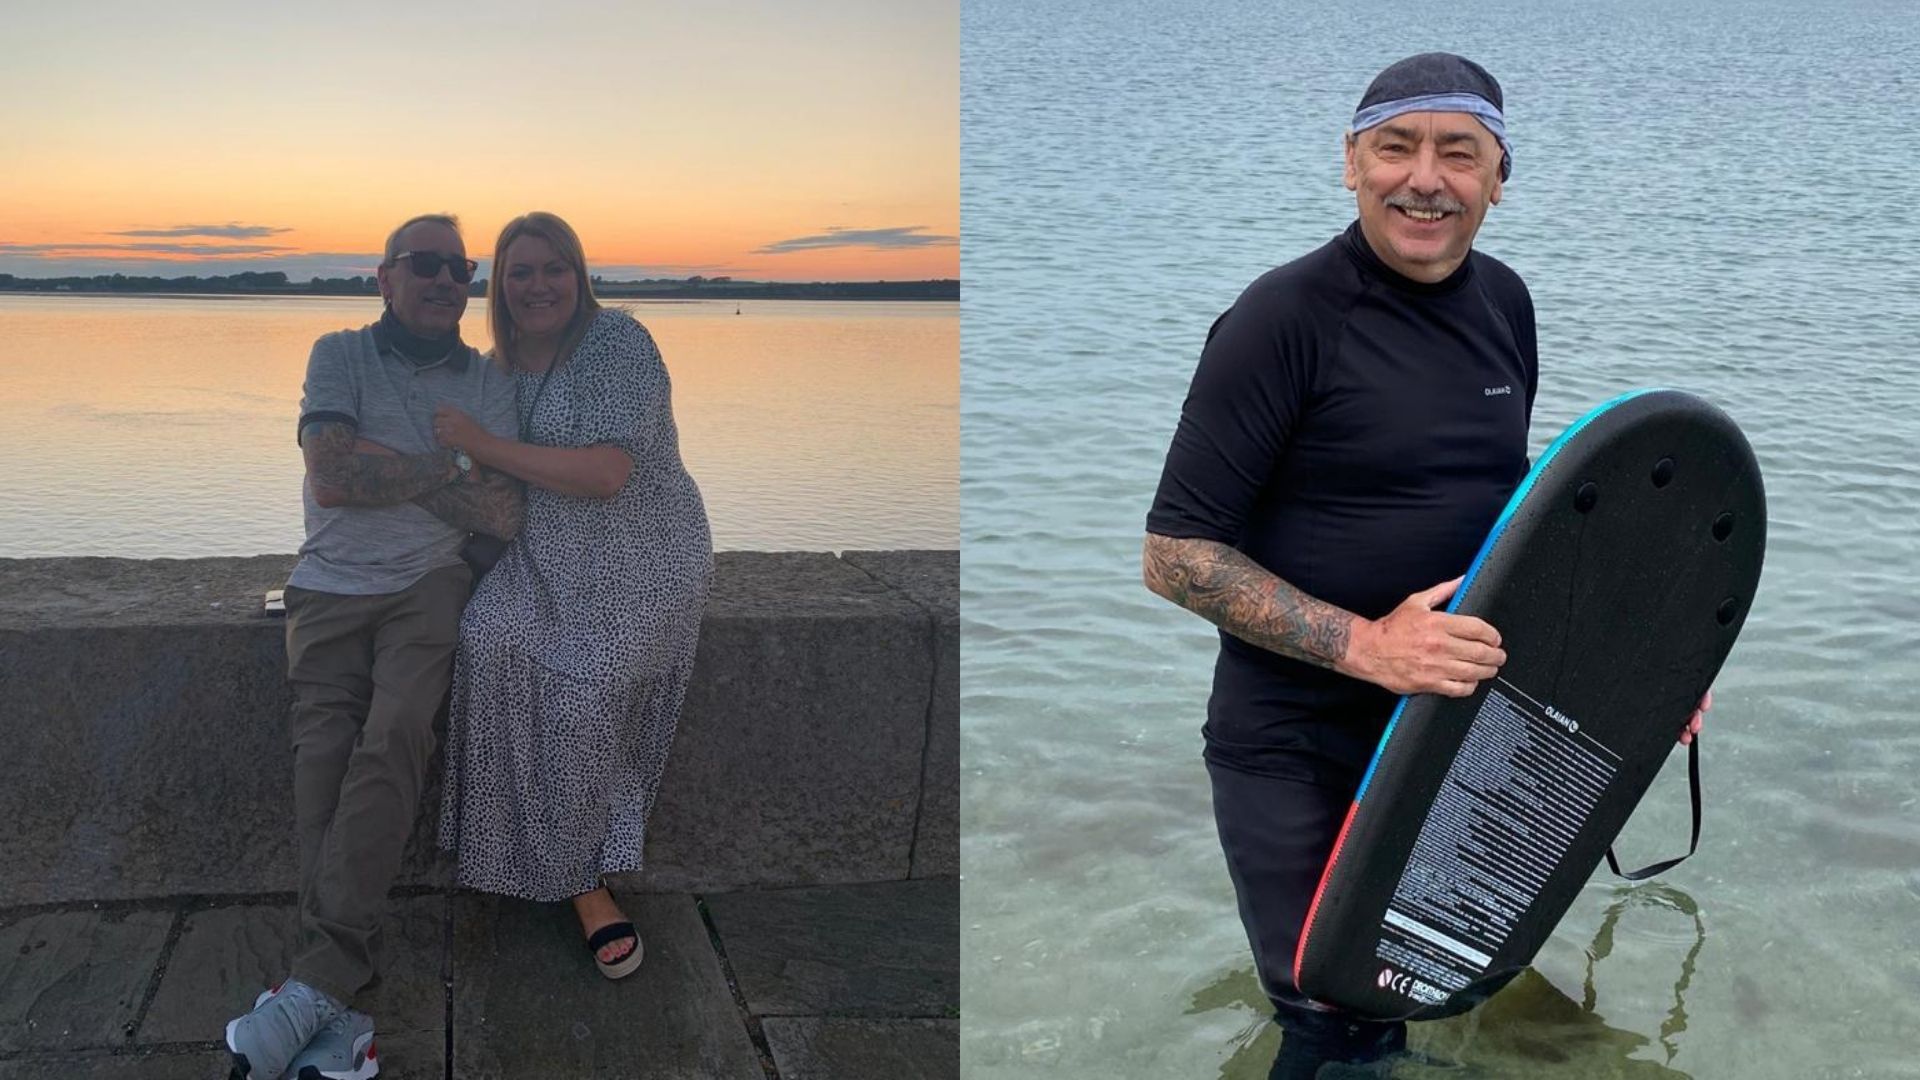 Left: a shot of Graham, a white man in his late 50s, and his wife Sharon, a white woman in her 50s. He is wearing a light blue polo, khaki trousers and sunglasses. She is wearing a summer dress. They are embracing and smiling at the camera. Right: Graham in the sea, wearing a wet suit and holding a body board and smiling at the camera.